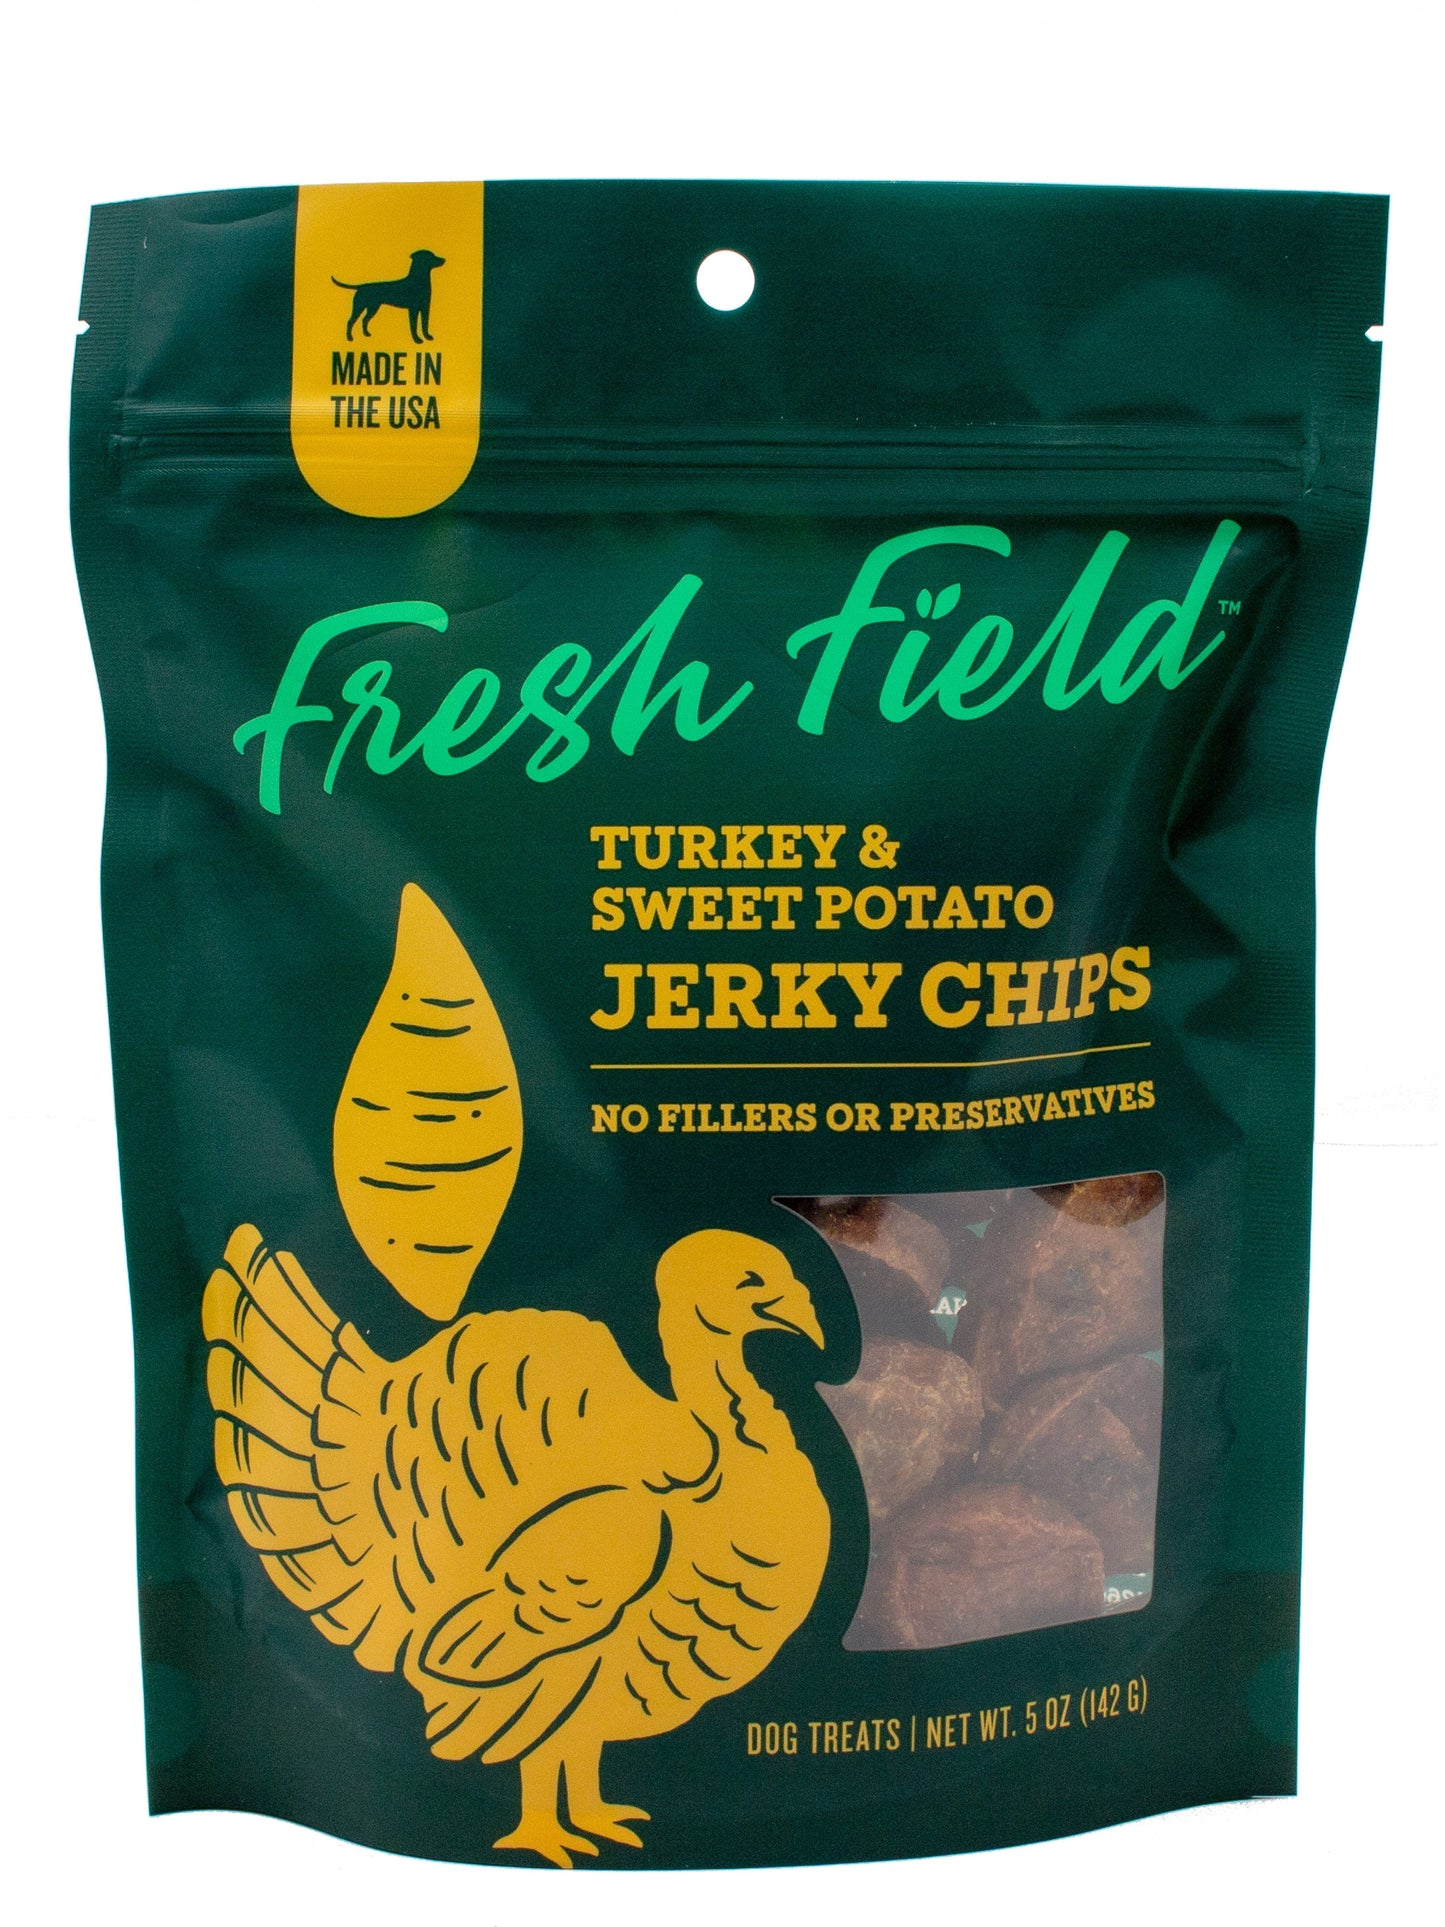 A photo of the front of the best 5 oz Turkey and Sweet Potato Jerky Chips Dog Treats from Colorado Pet Treats by Fresh Field. Colorado Pet Treats - All-Natural, All-American Dog Jerky, Jerky Chips, and Bones - Treat your furry friend to our delicious and healthy pet treats made with only the finest ingredients sourced in the USA. The best crunchy and savory jerky chips made with all-natural ingredients and baked to perfection.